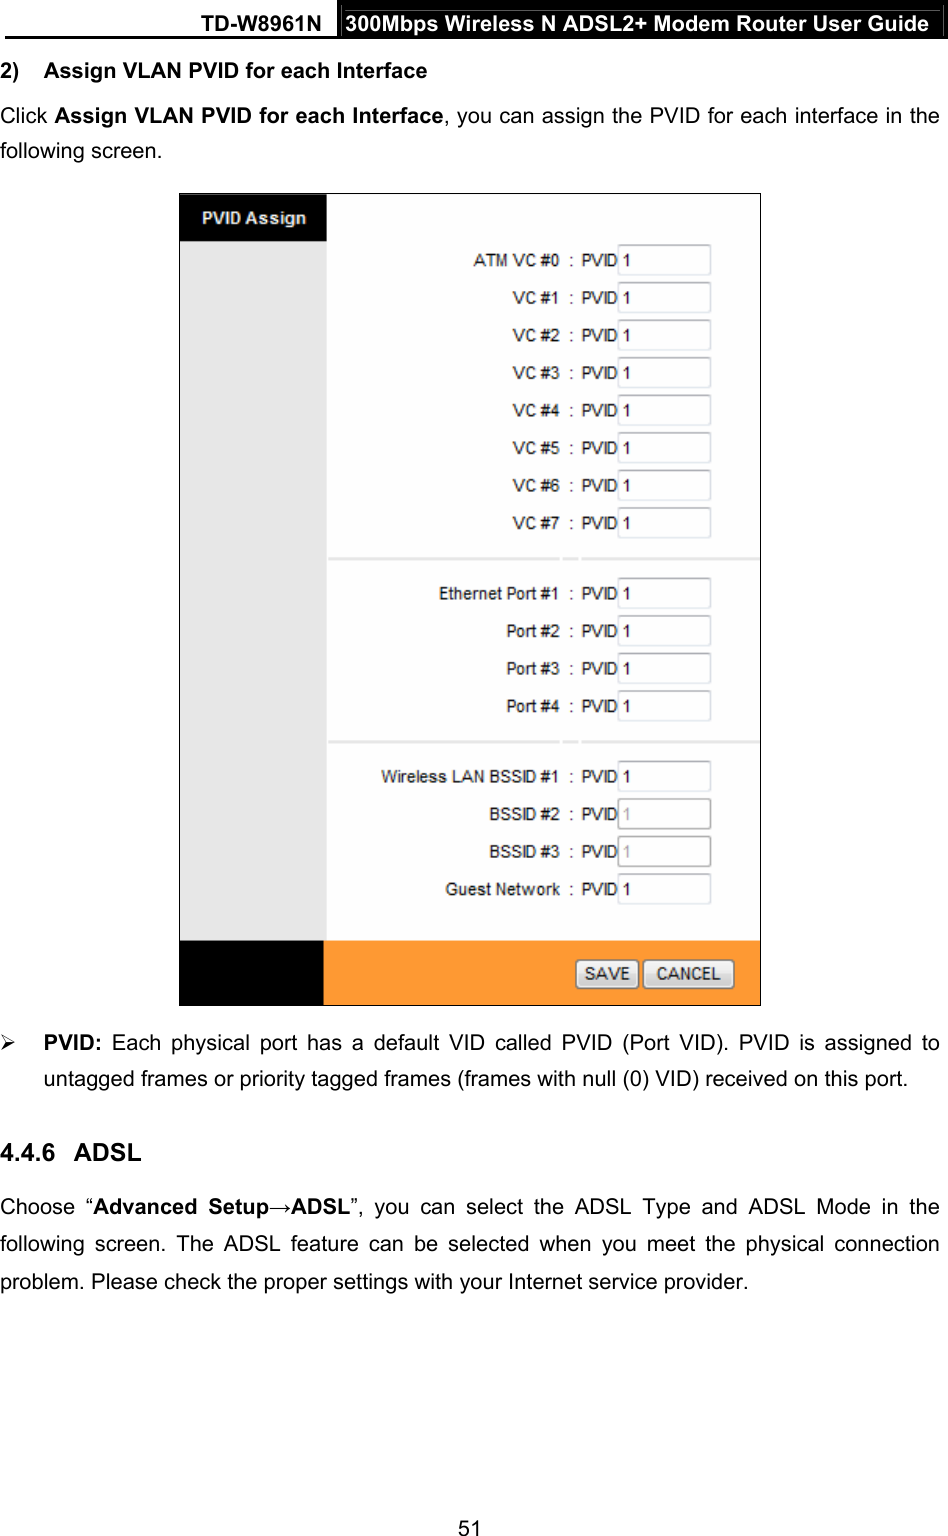 TD-W8961N  300Mbps Wireless N ADSL2+ Modem Router User Guide 51  2)  Assign VLAN PVID for each Interface Click Assign VLAN PVID for each Interface, you can assign the PVID for each interface in the following screen.   PVID: Each physical port has a default VID called PVID (Port VID). PVID is assigned to untagged frames or priority tagged frames (frames with null (0) VID) received on this port. 4.4.6  ADSL Choose “Advanced Setup→ADSL”, you can select the ADSL Type and ADSL Mode in the following screen. The ADSL feature can be selected when you meet the physical connection problem. Please check the proper settings with your Internet service provider. 